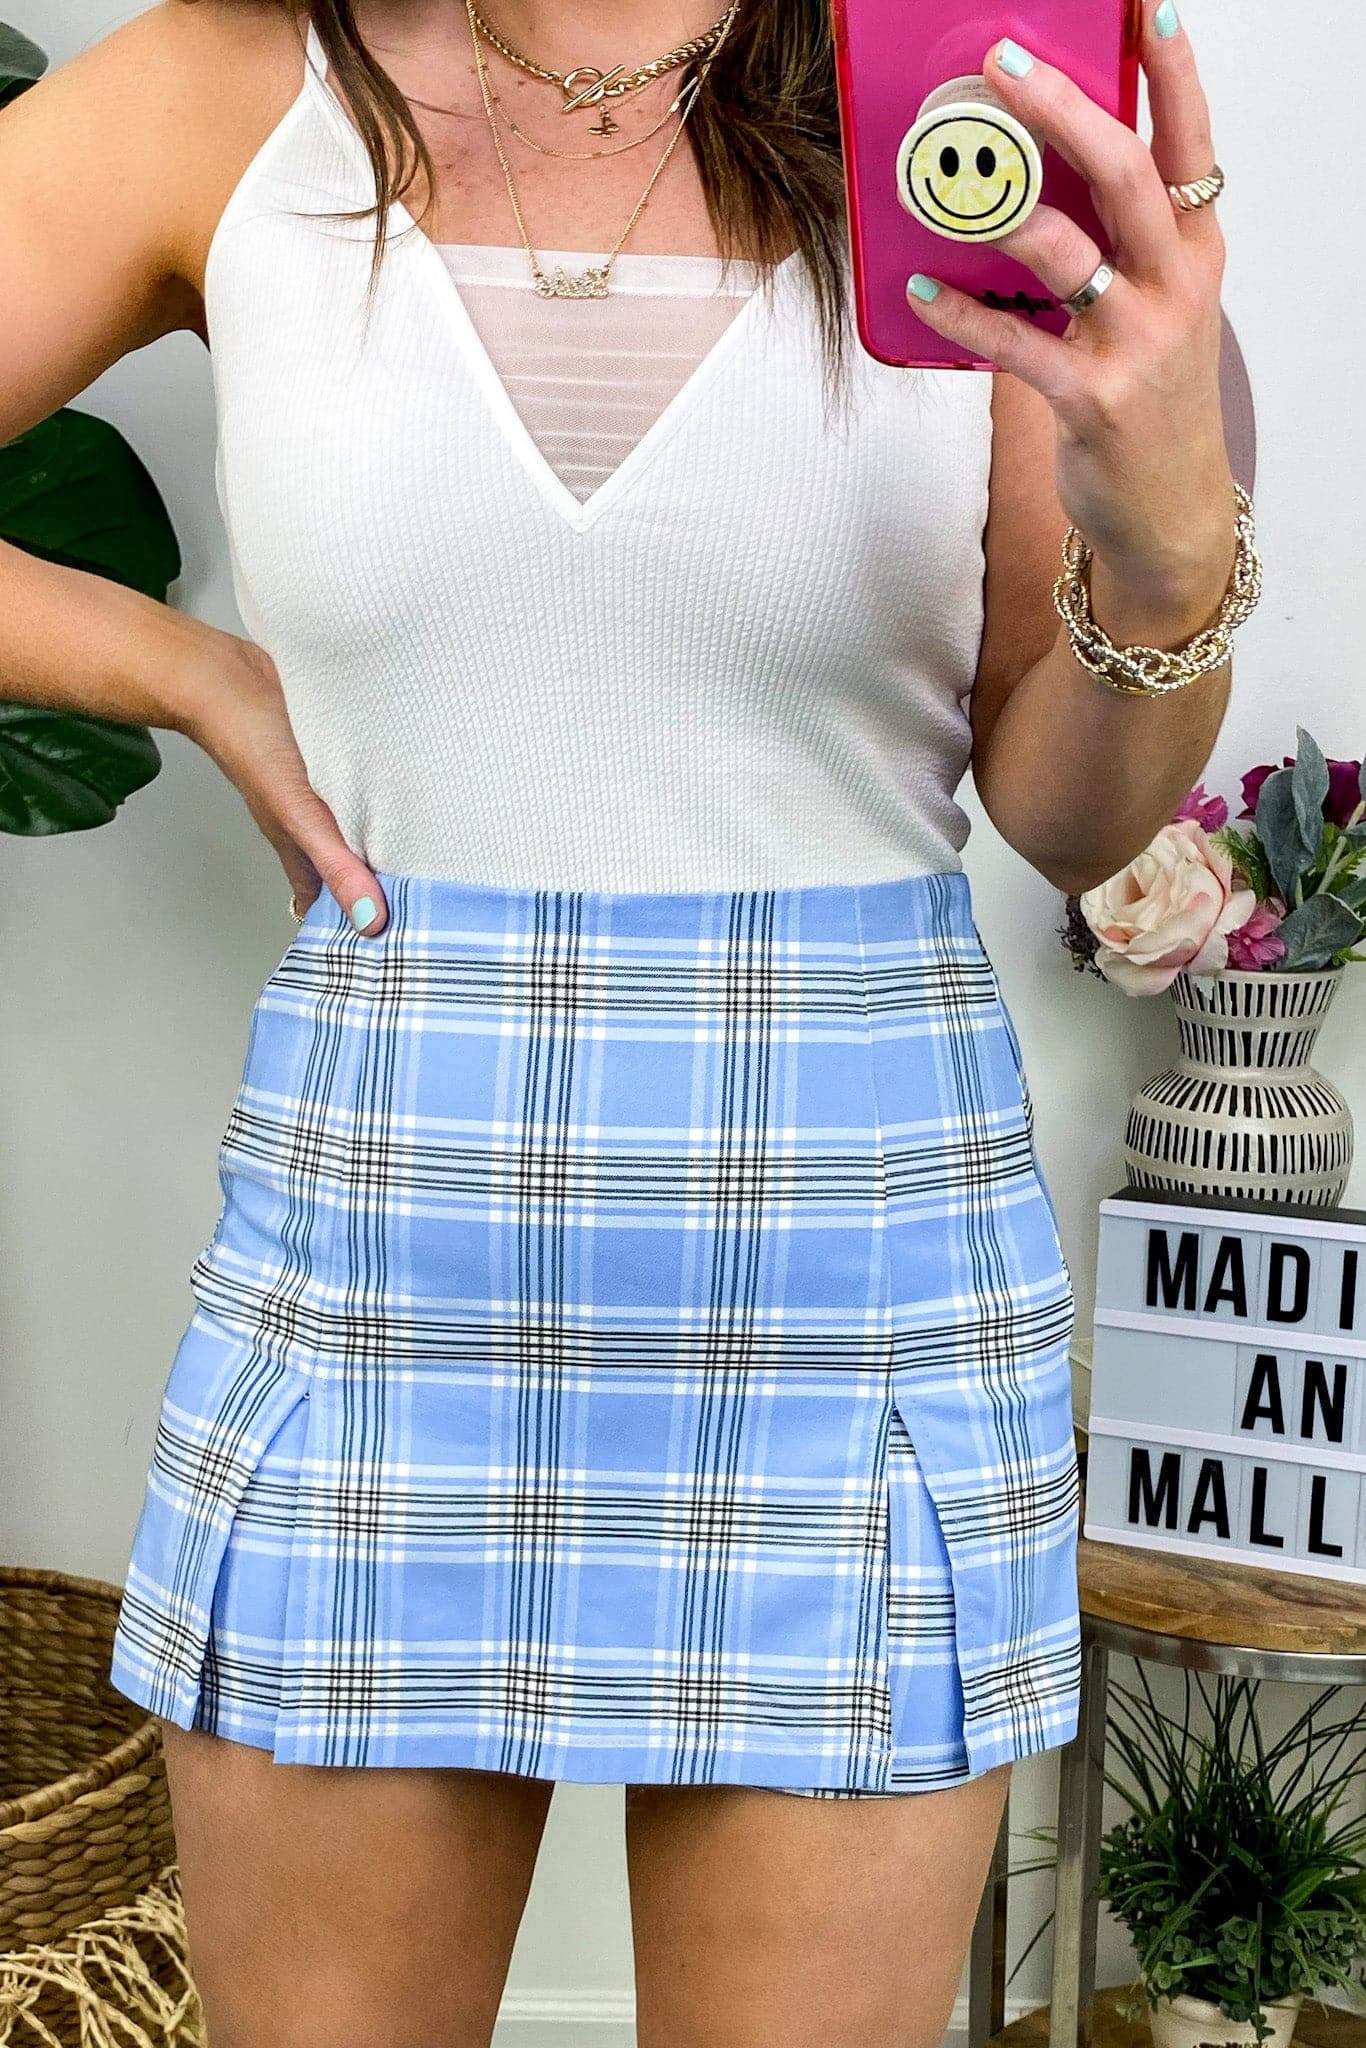 Sky / S Coley Plaid Print Skort - FINAL SALE - Madison and Mallory